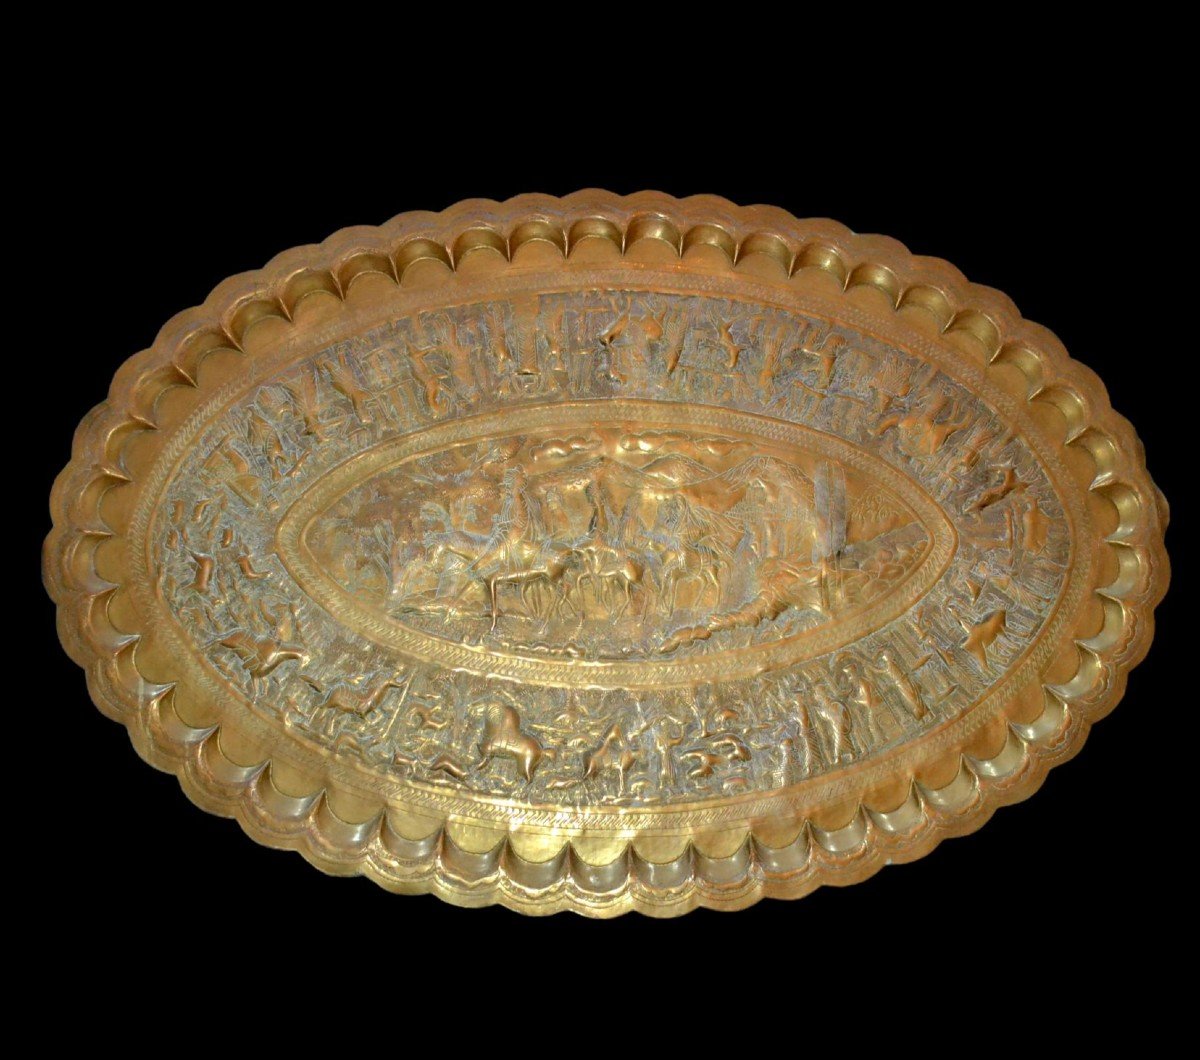 Large Antique Tray, D 49 Cm, In Chiseled Copper, Middle East, Second Half Of The 19th Century-photo-8